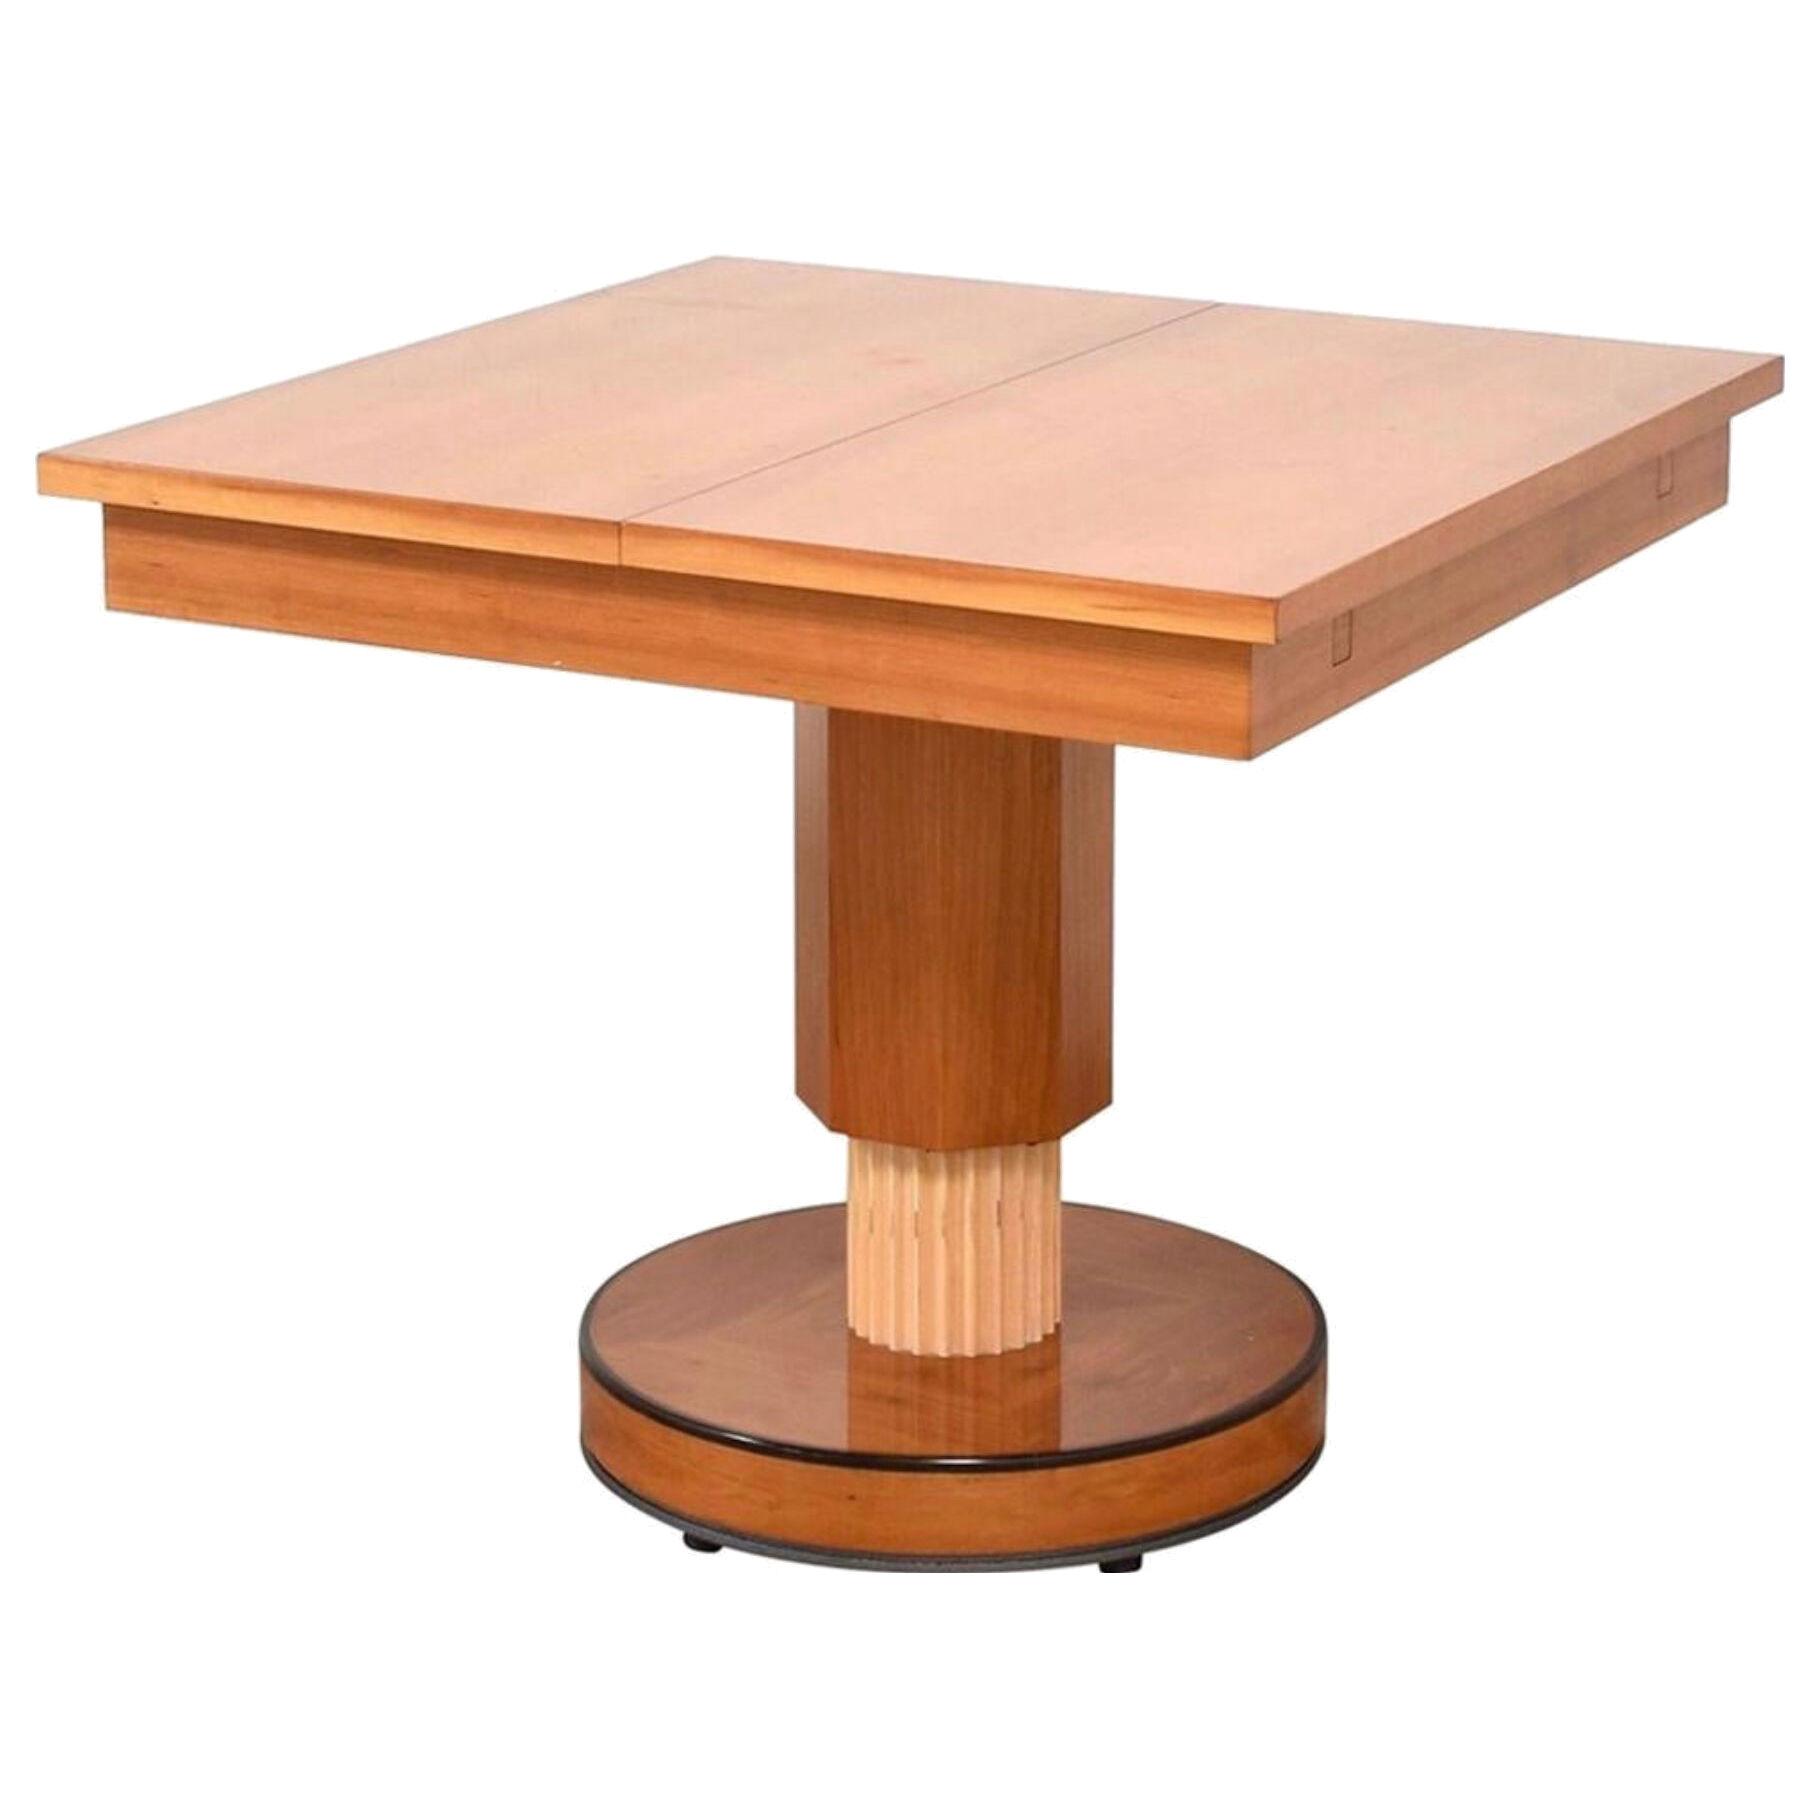 Massimo Scolari for Giorgetti S.p.A. Extendable Ur Table, Fluted Pedestal Base